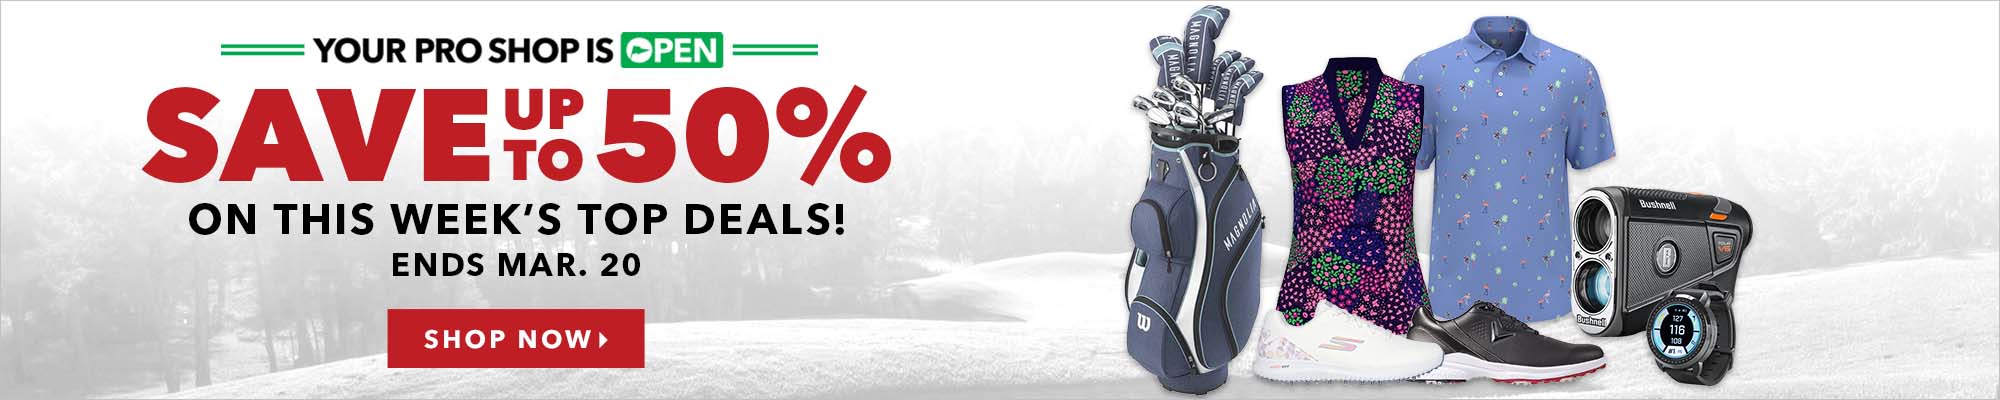 Your Pro Shop is Open - Save On This Week's Deals